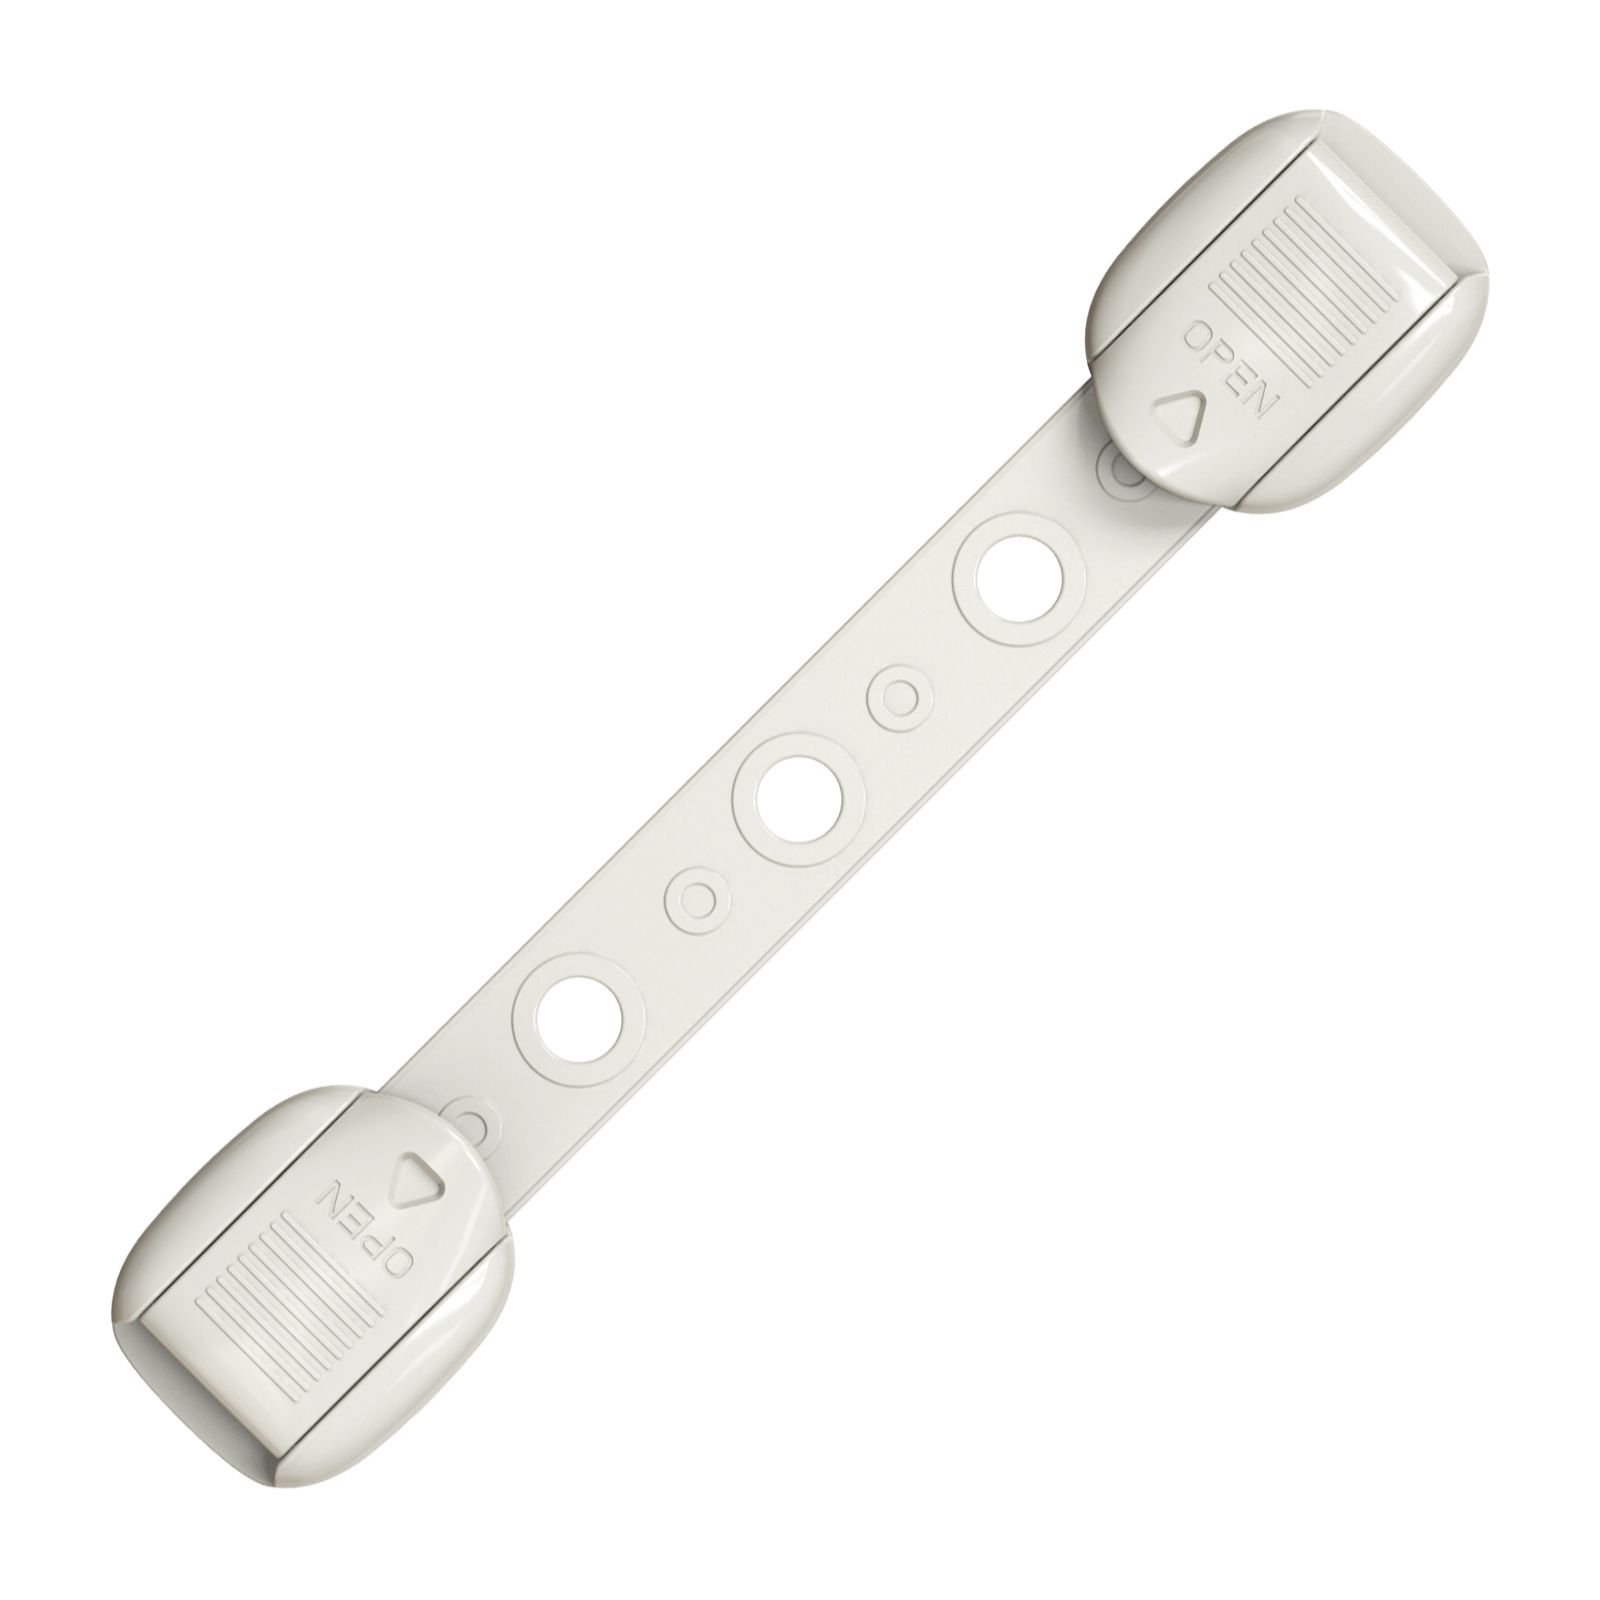 Child Safety Locks for Drawers, Cabinets, and Refrigerators with Hand Guard Protection